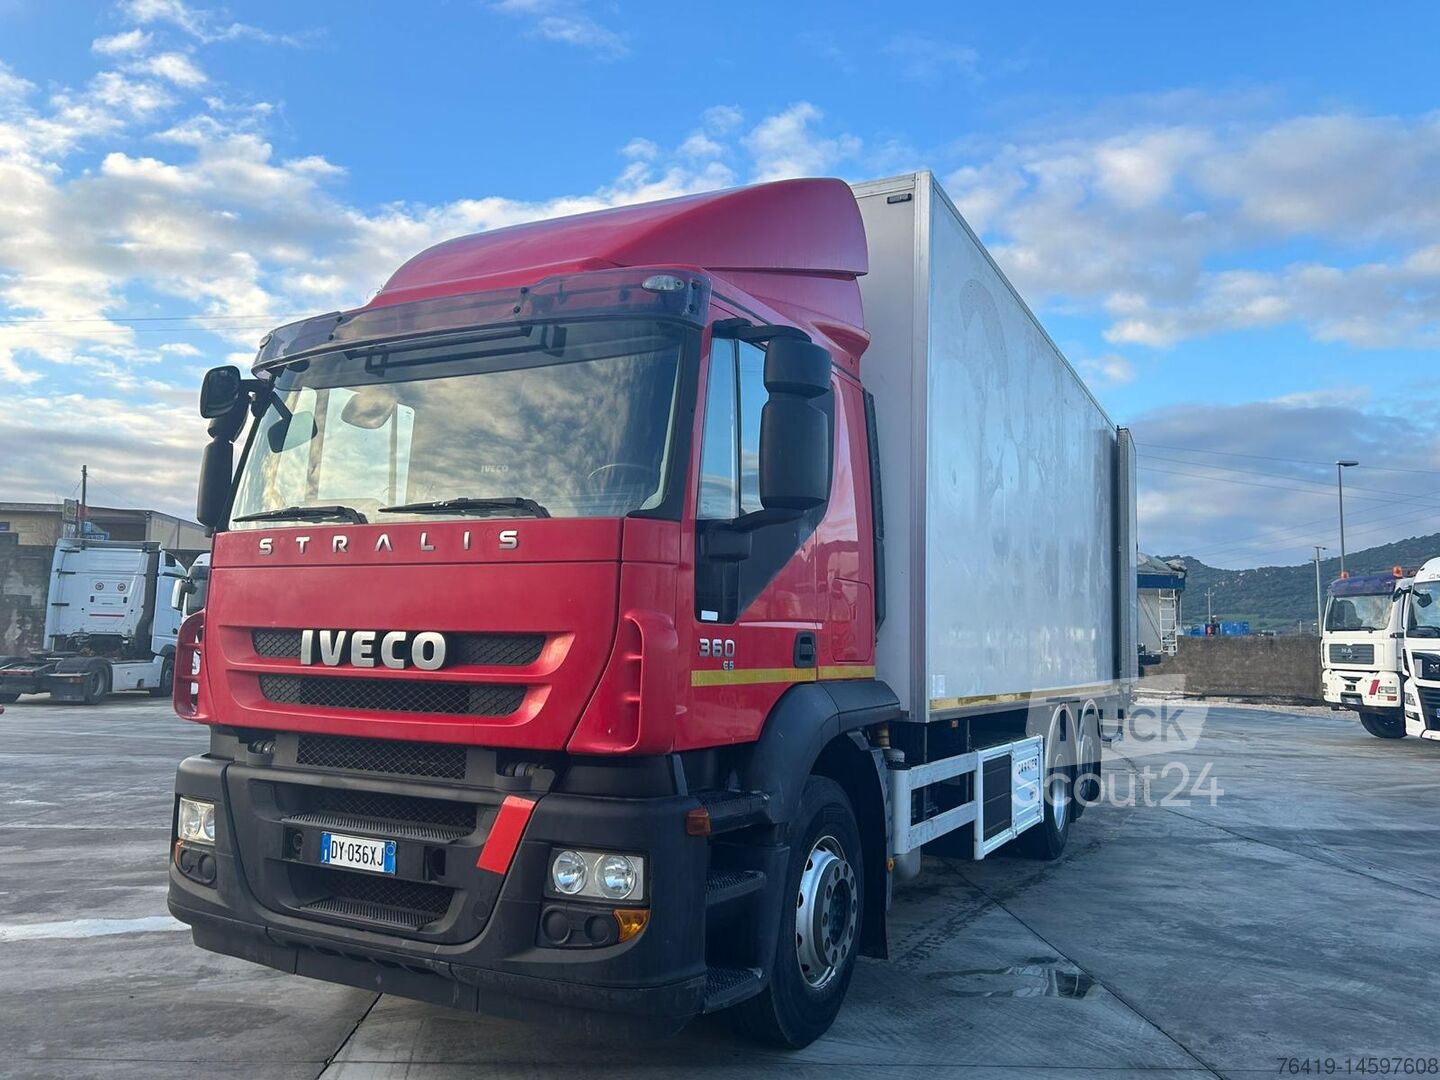 ▷ Iveco STRALIS 350 ISOTERMICO buy used at TruckScout24